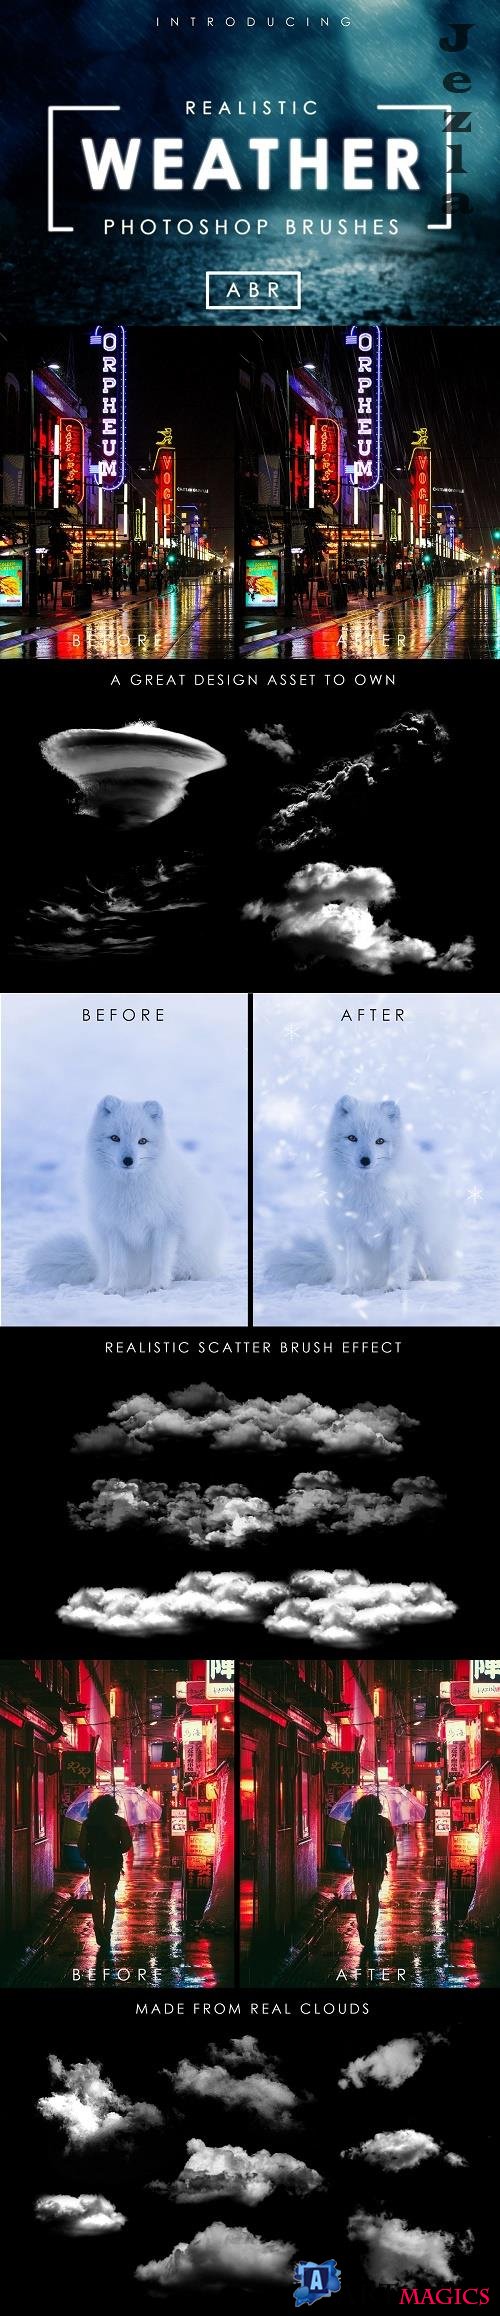 75 Realistic Weather Brushes - 4269070